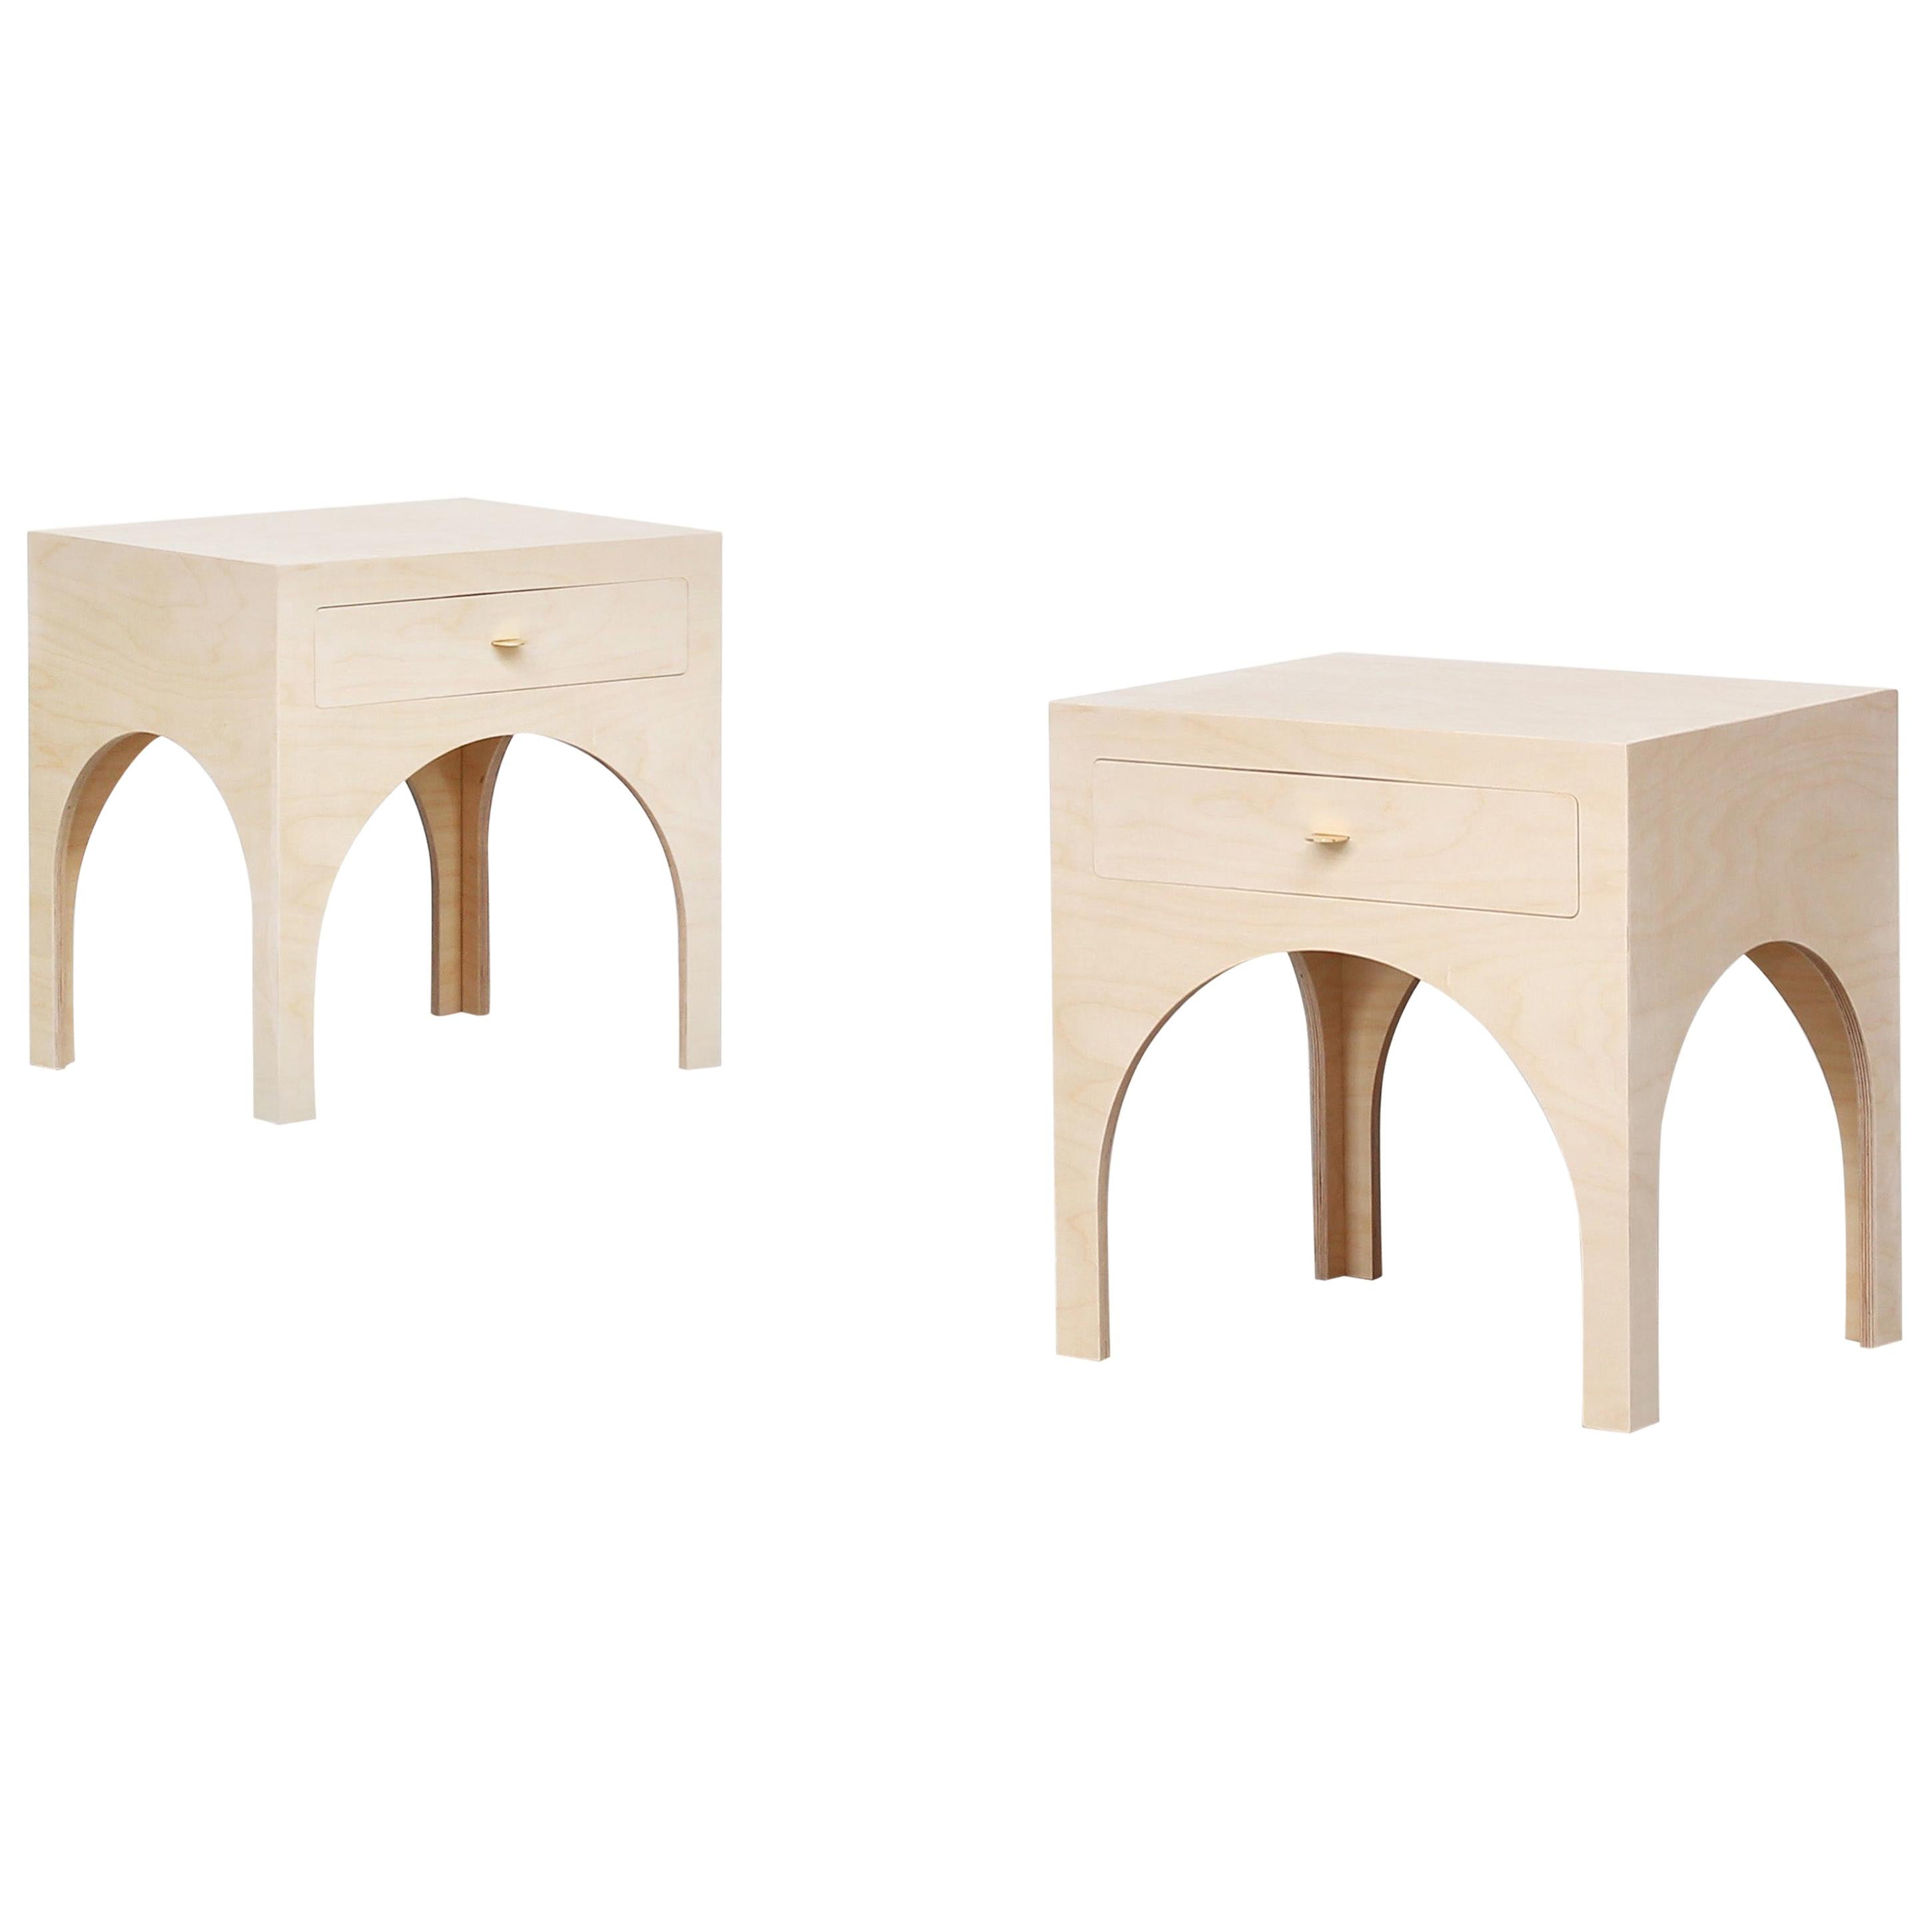 Pair of Minimalist Nightstands Consoles Commodes 2 by Atelier Bachmann, 2019